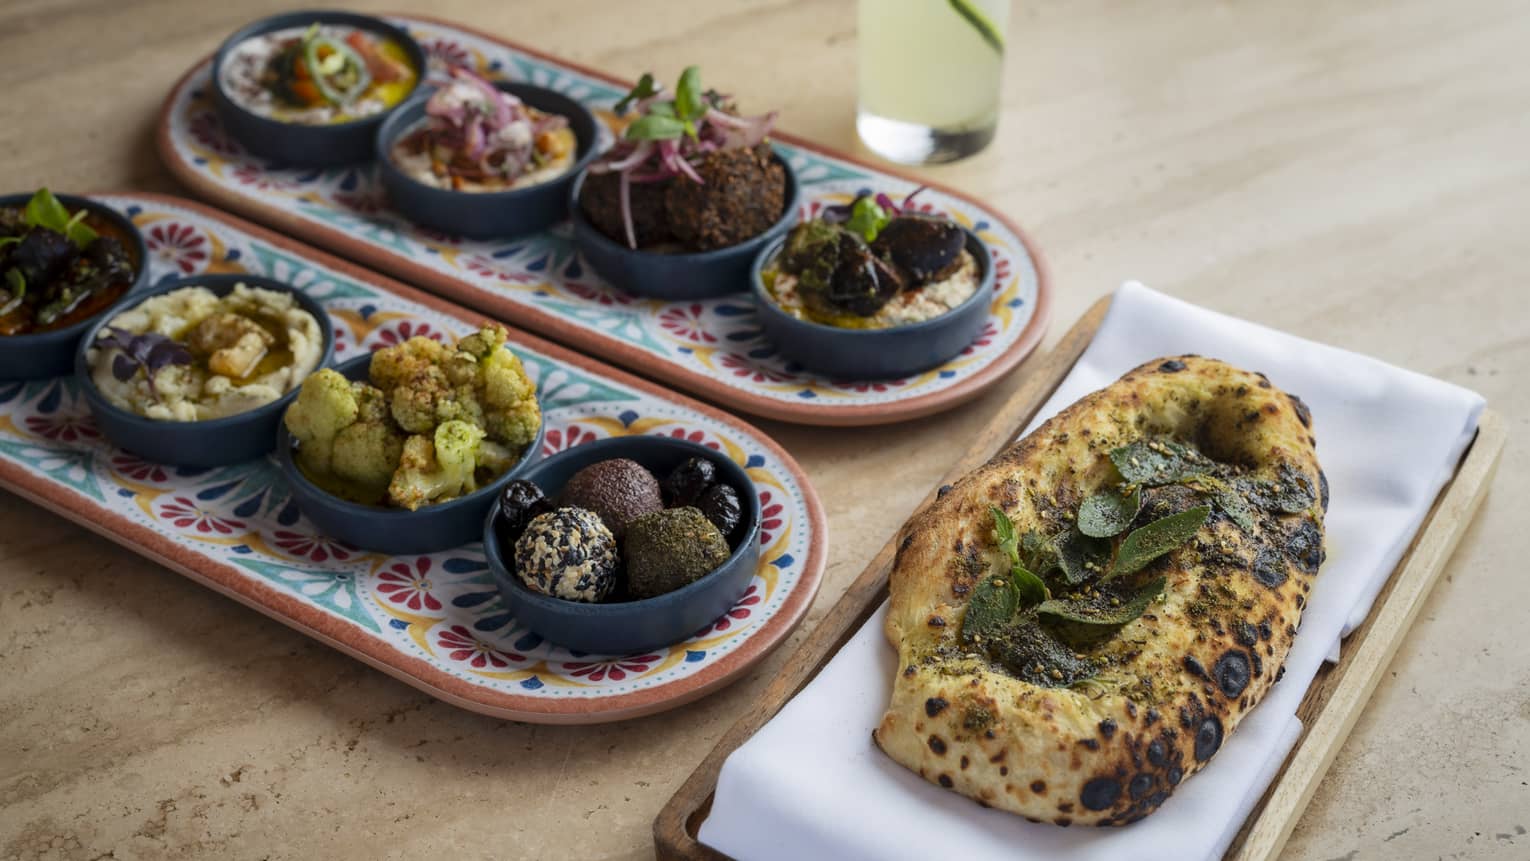 Two platters lined with four small plates of Mediterranean dishes and a platter of fresh-baked bread topped with leaves on a light-wood table